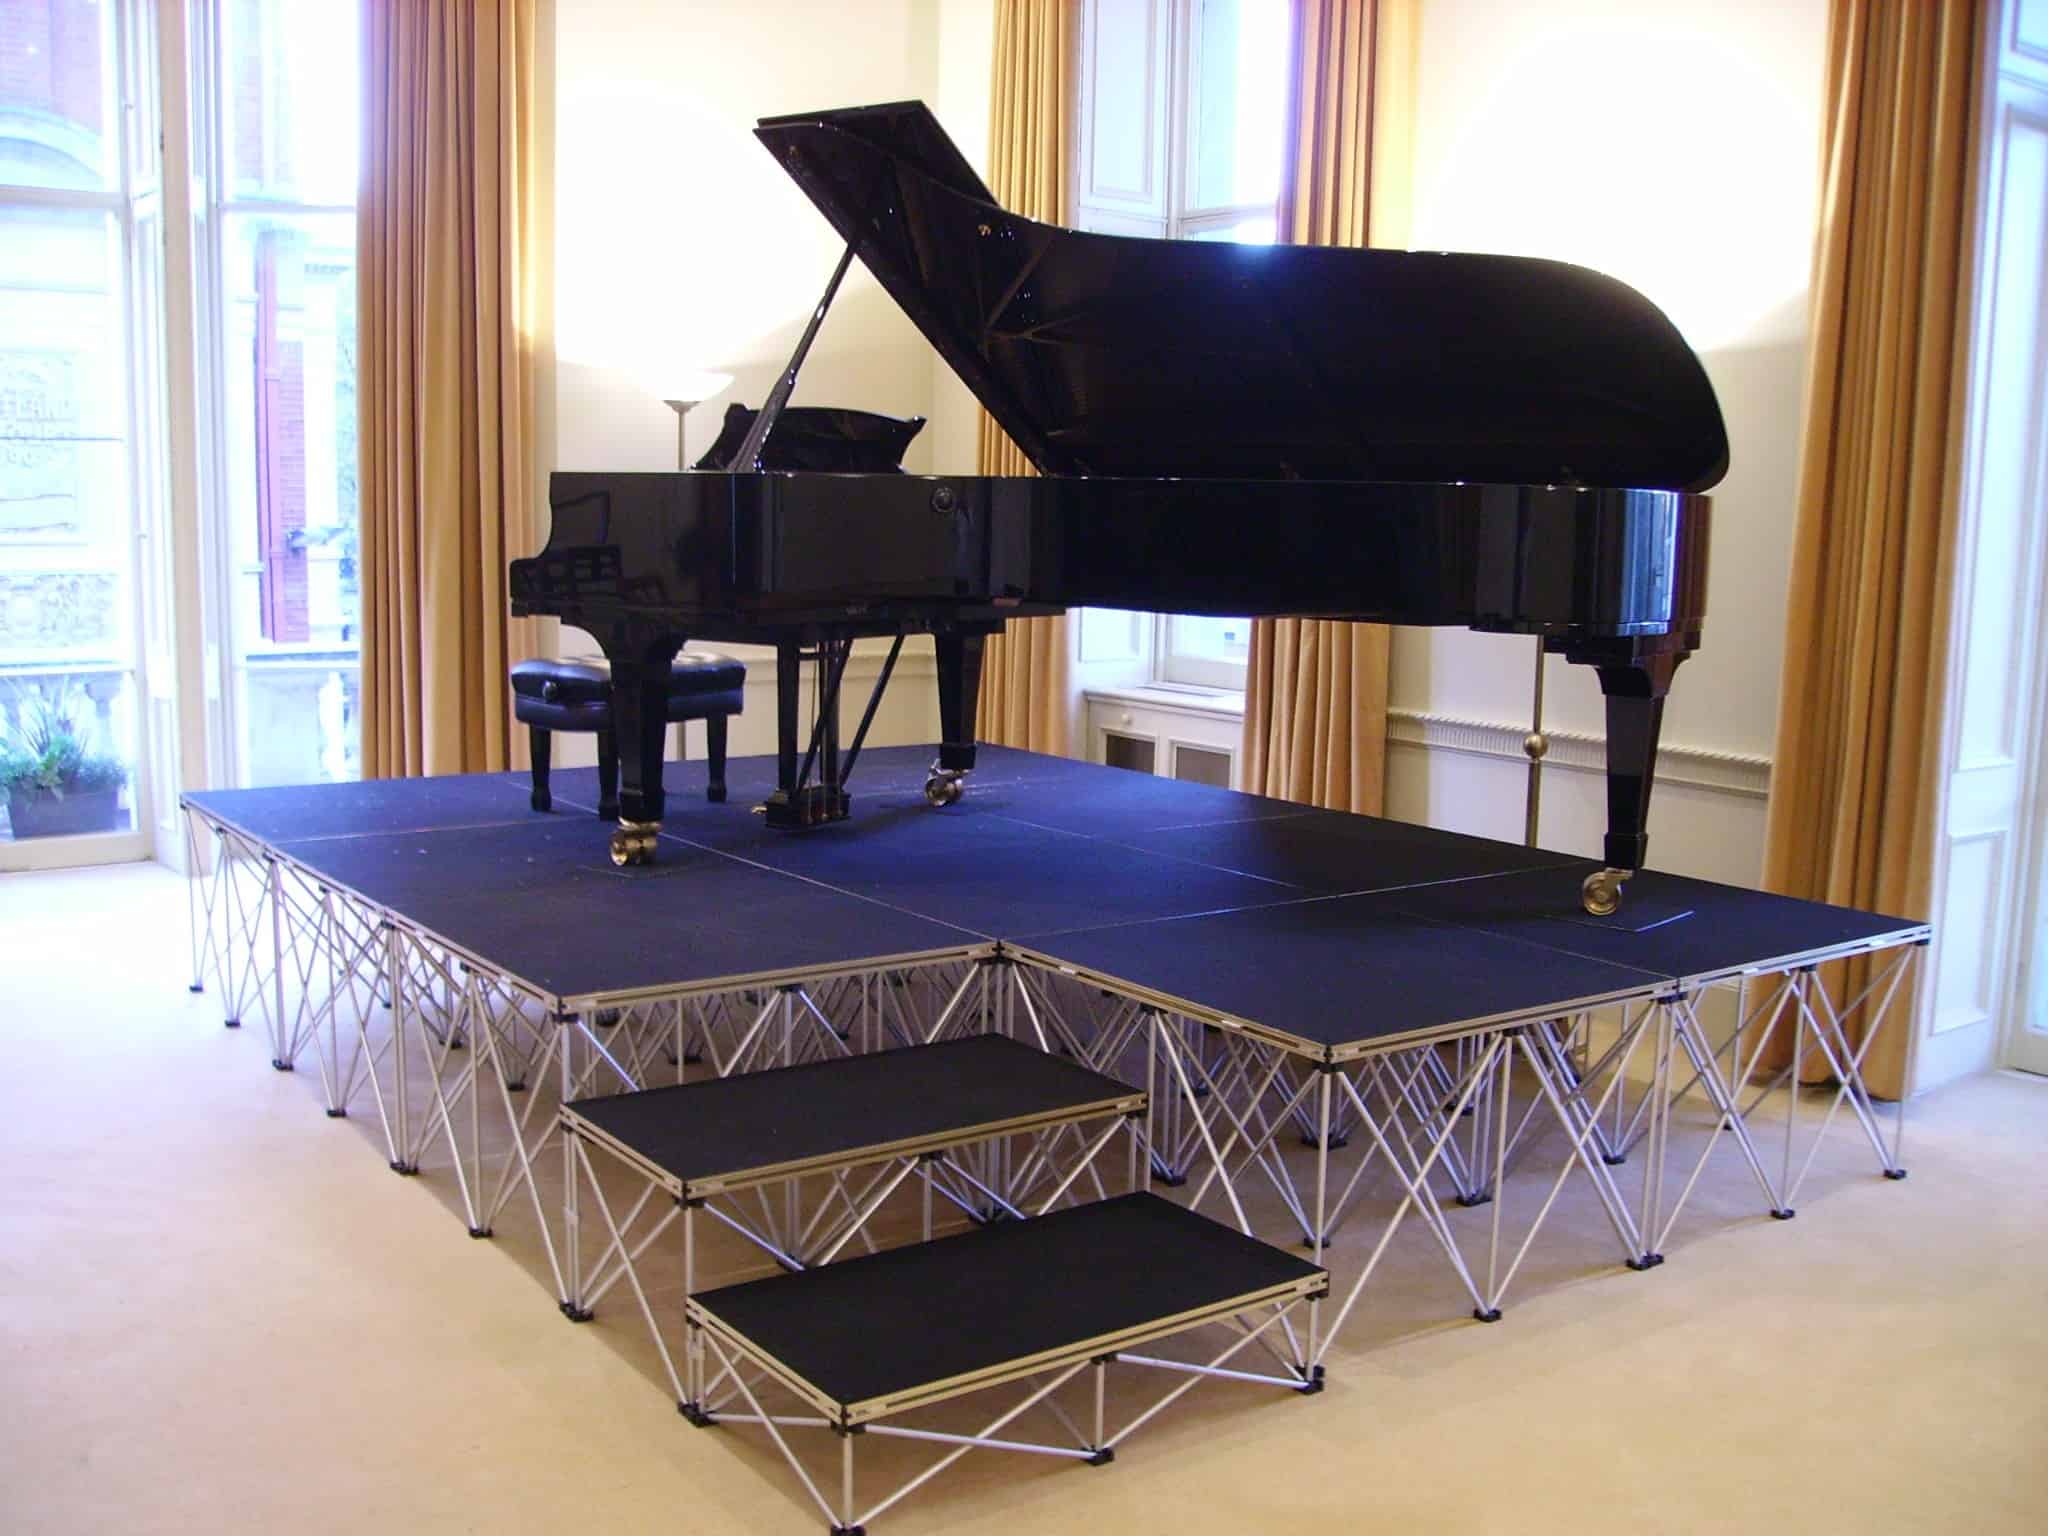 Staging with good weight loading is NexGen Portable staging, which can easily support a grand piano.